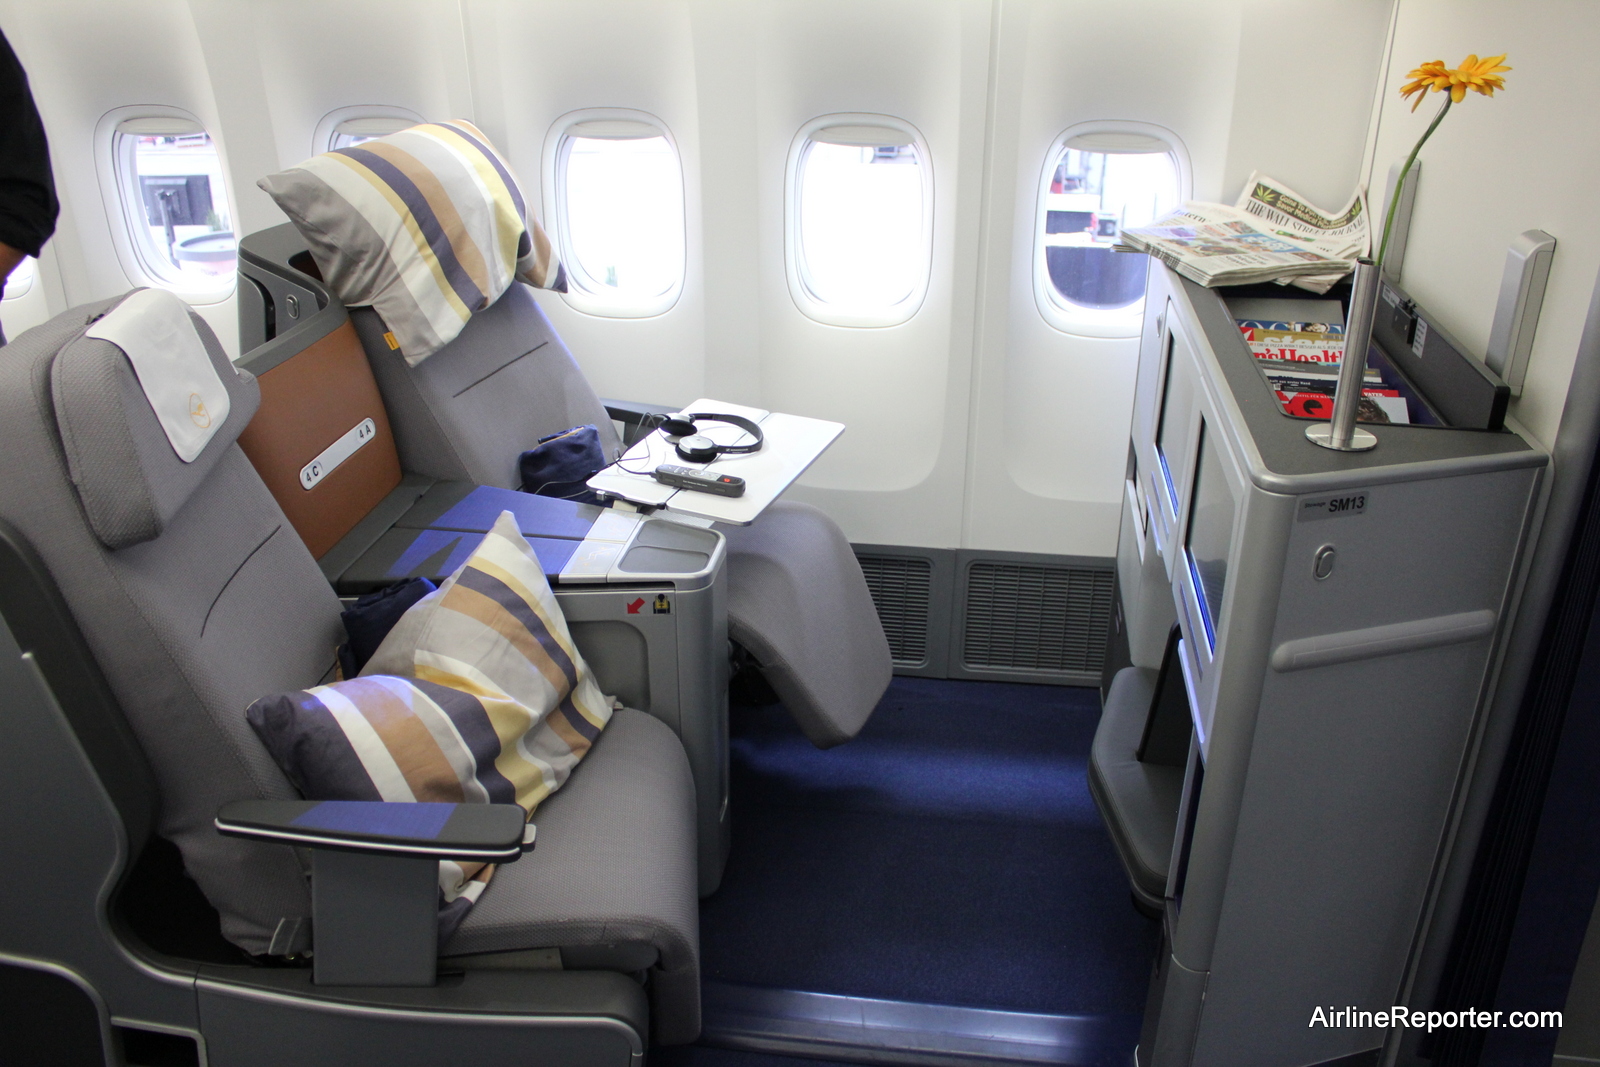 Flying On The Inaugural Boeing 747 8 Intercontinental Flight